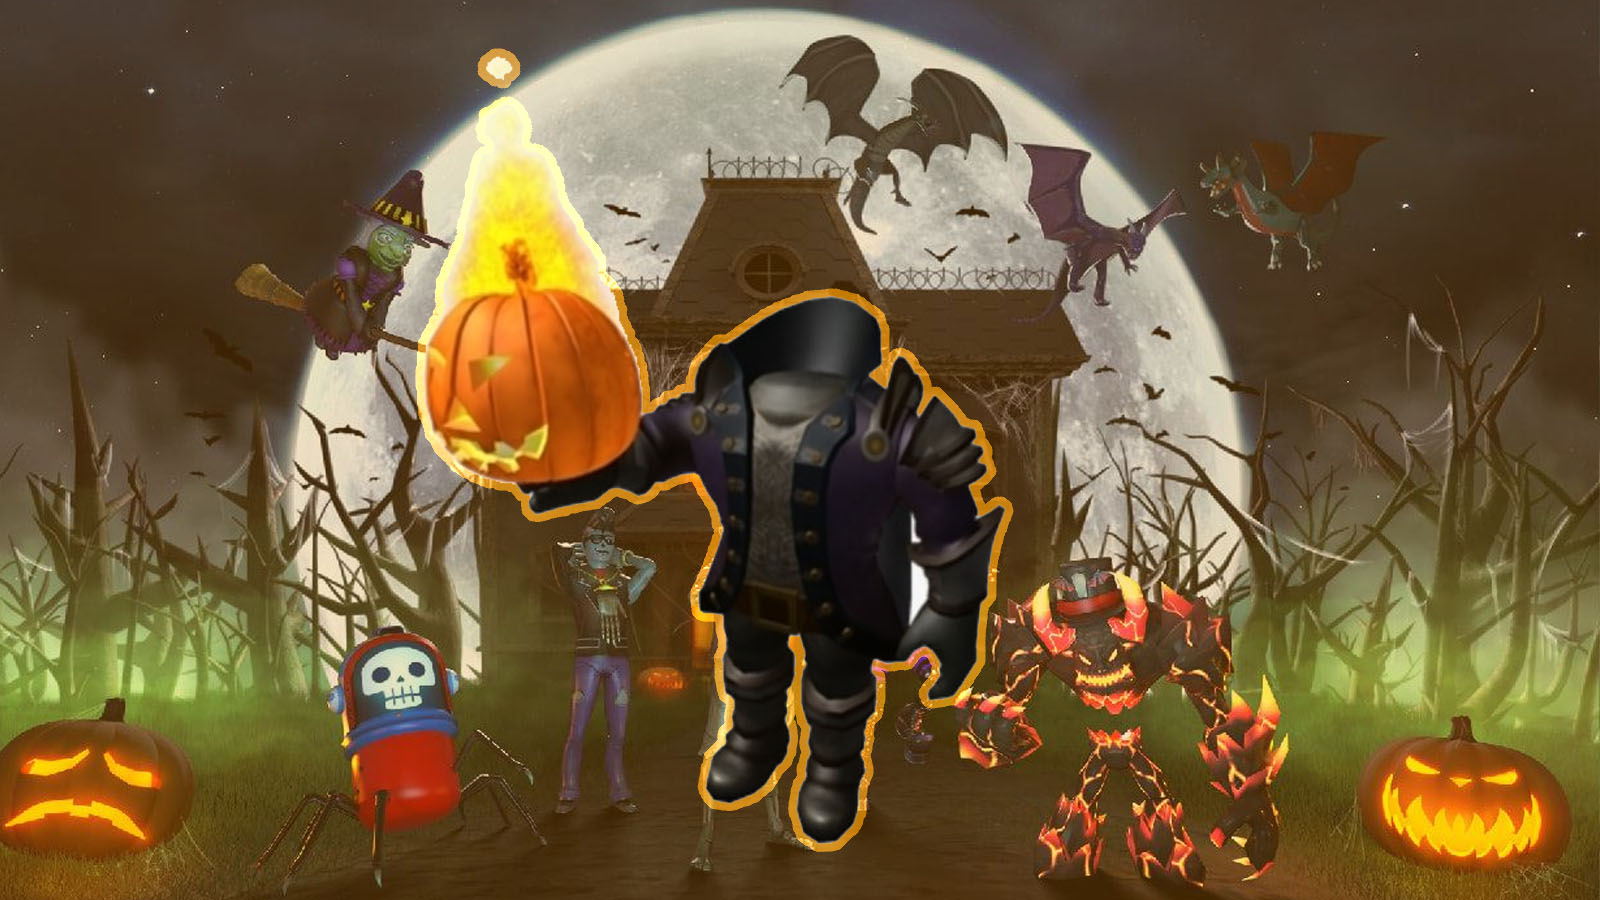 Periodic Games on X: The Headless Horseman has arrived in #Specter, from  now until November 8th trade-in candy for exclusive rewards. #Roblox  #RobloxDev  / X